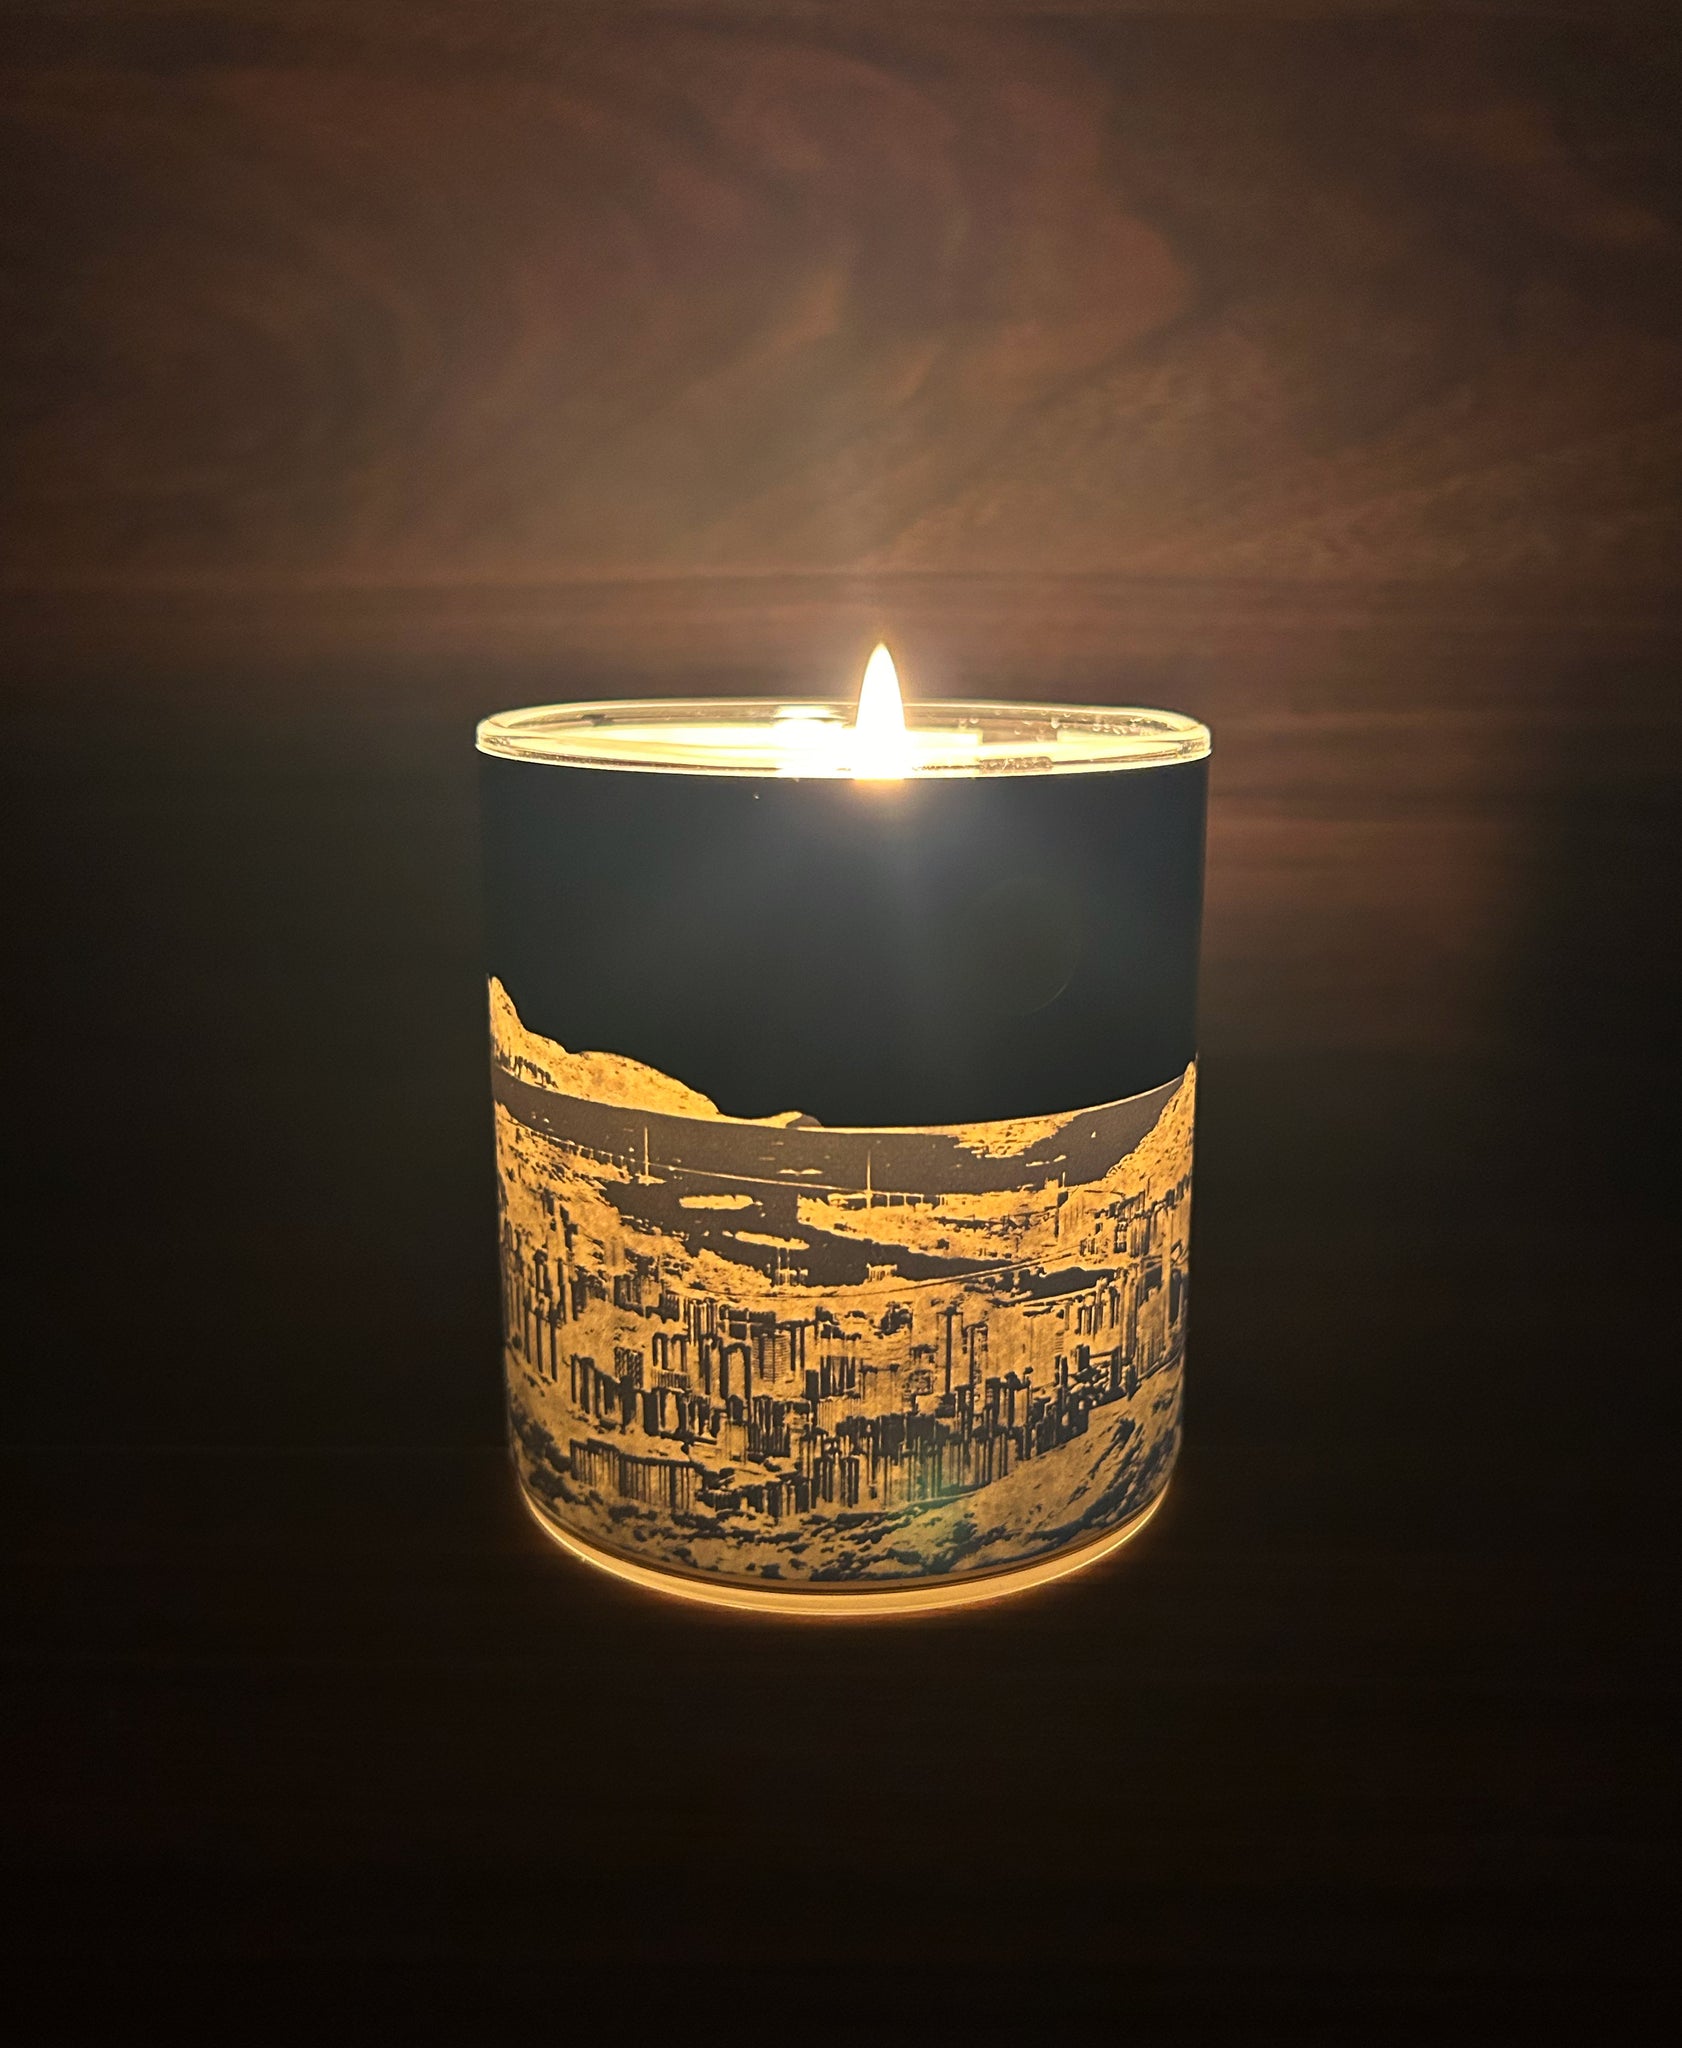 [Set] Victoria Harbour and Candle "Dusk"